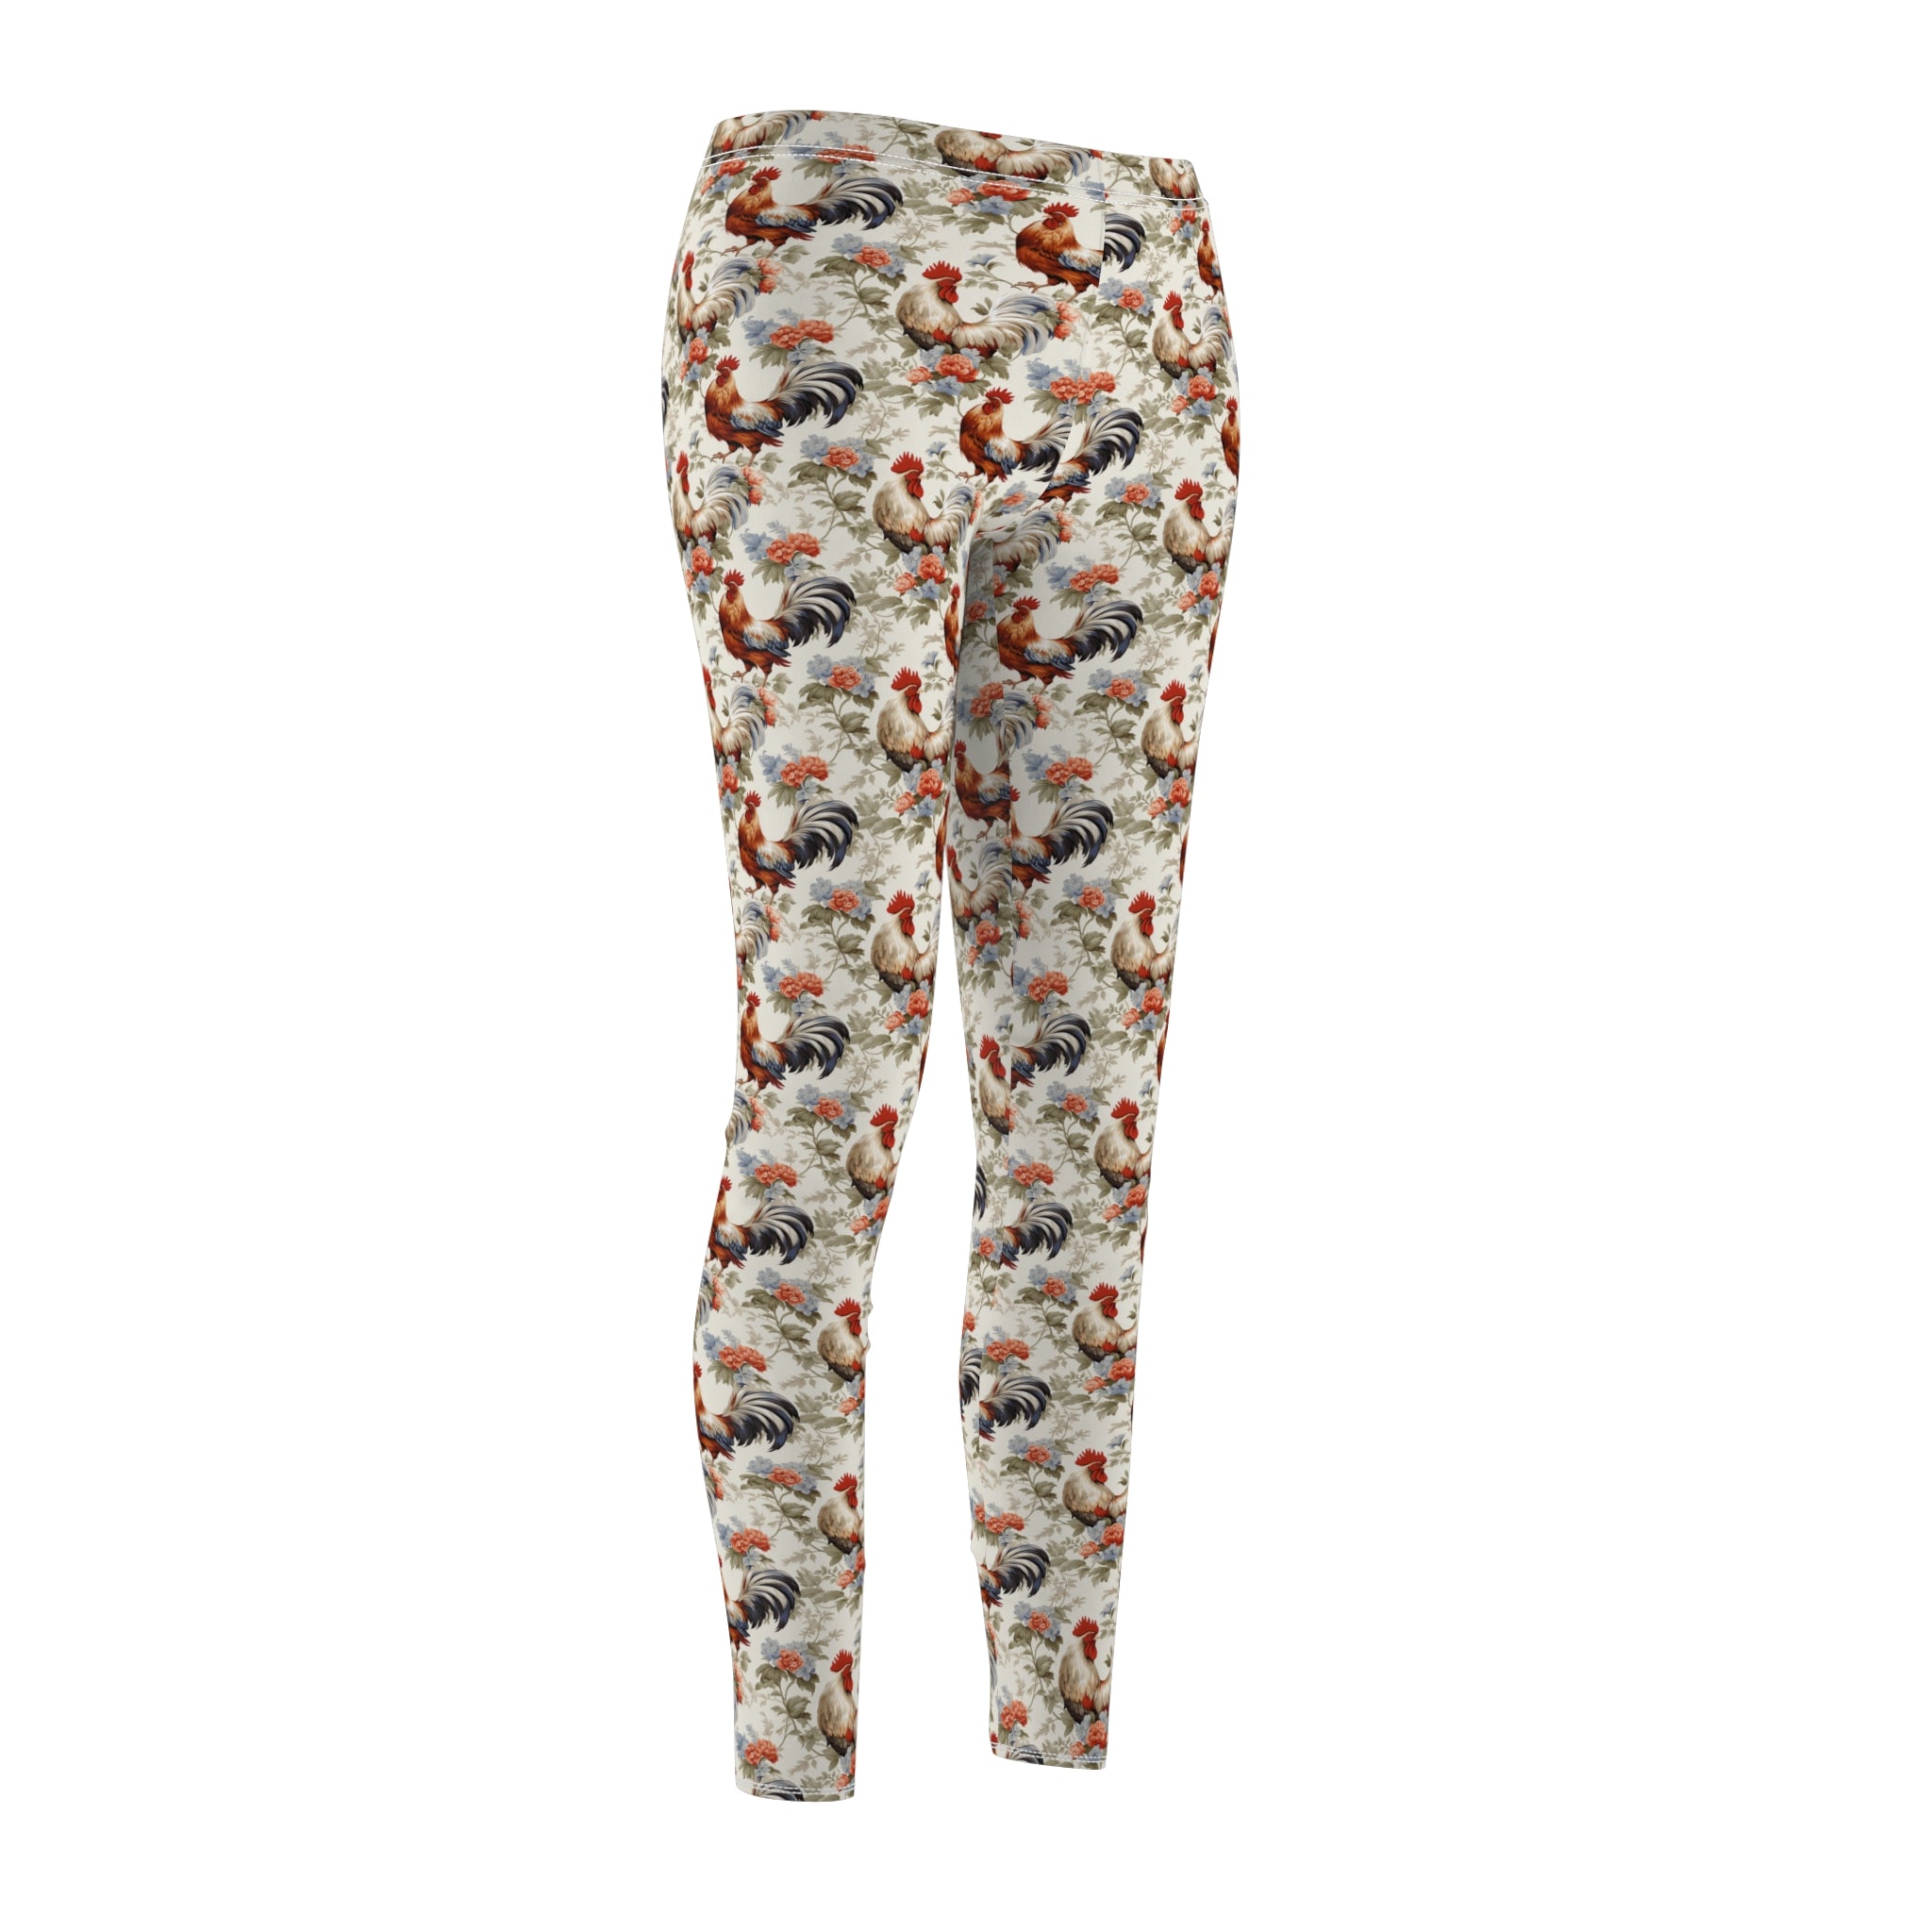 Unique Chicken Farmhouse Gym Leggings for Women – Stand Out in Style!